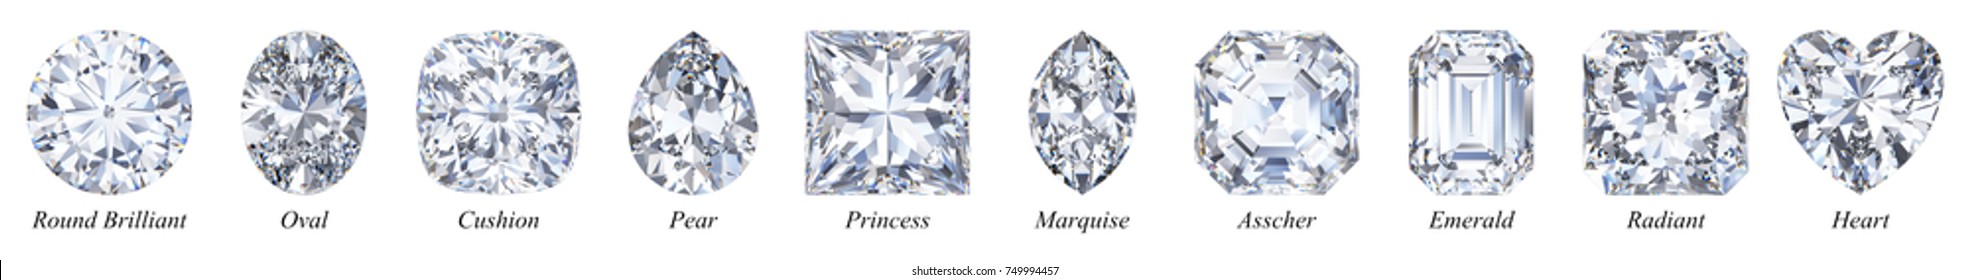 Ten the most popular diamond cuts and shapes in one row with names, isolated on white background. 3D rendering illustration